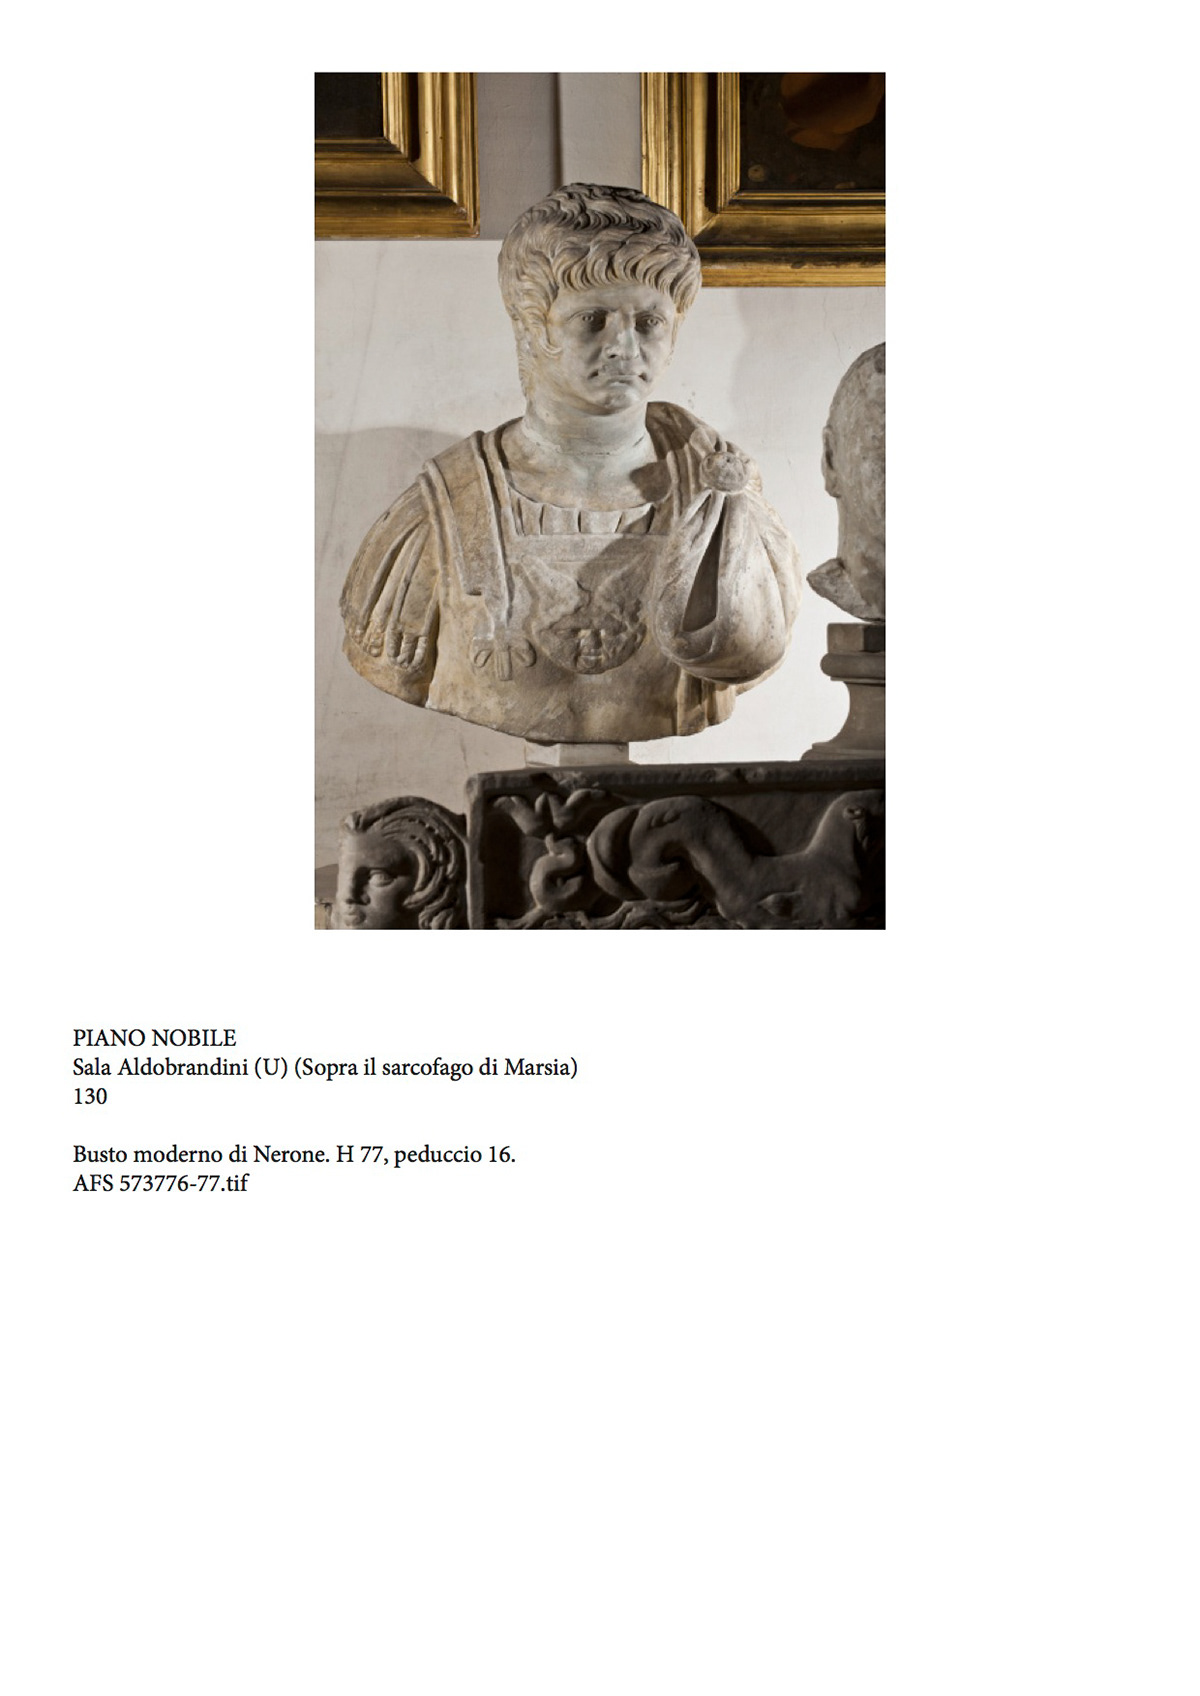 artexhibition archeological Curating Finearts istanbul